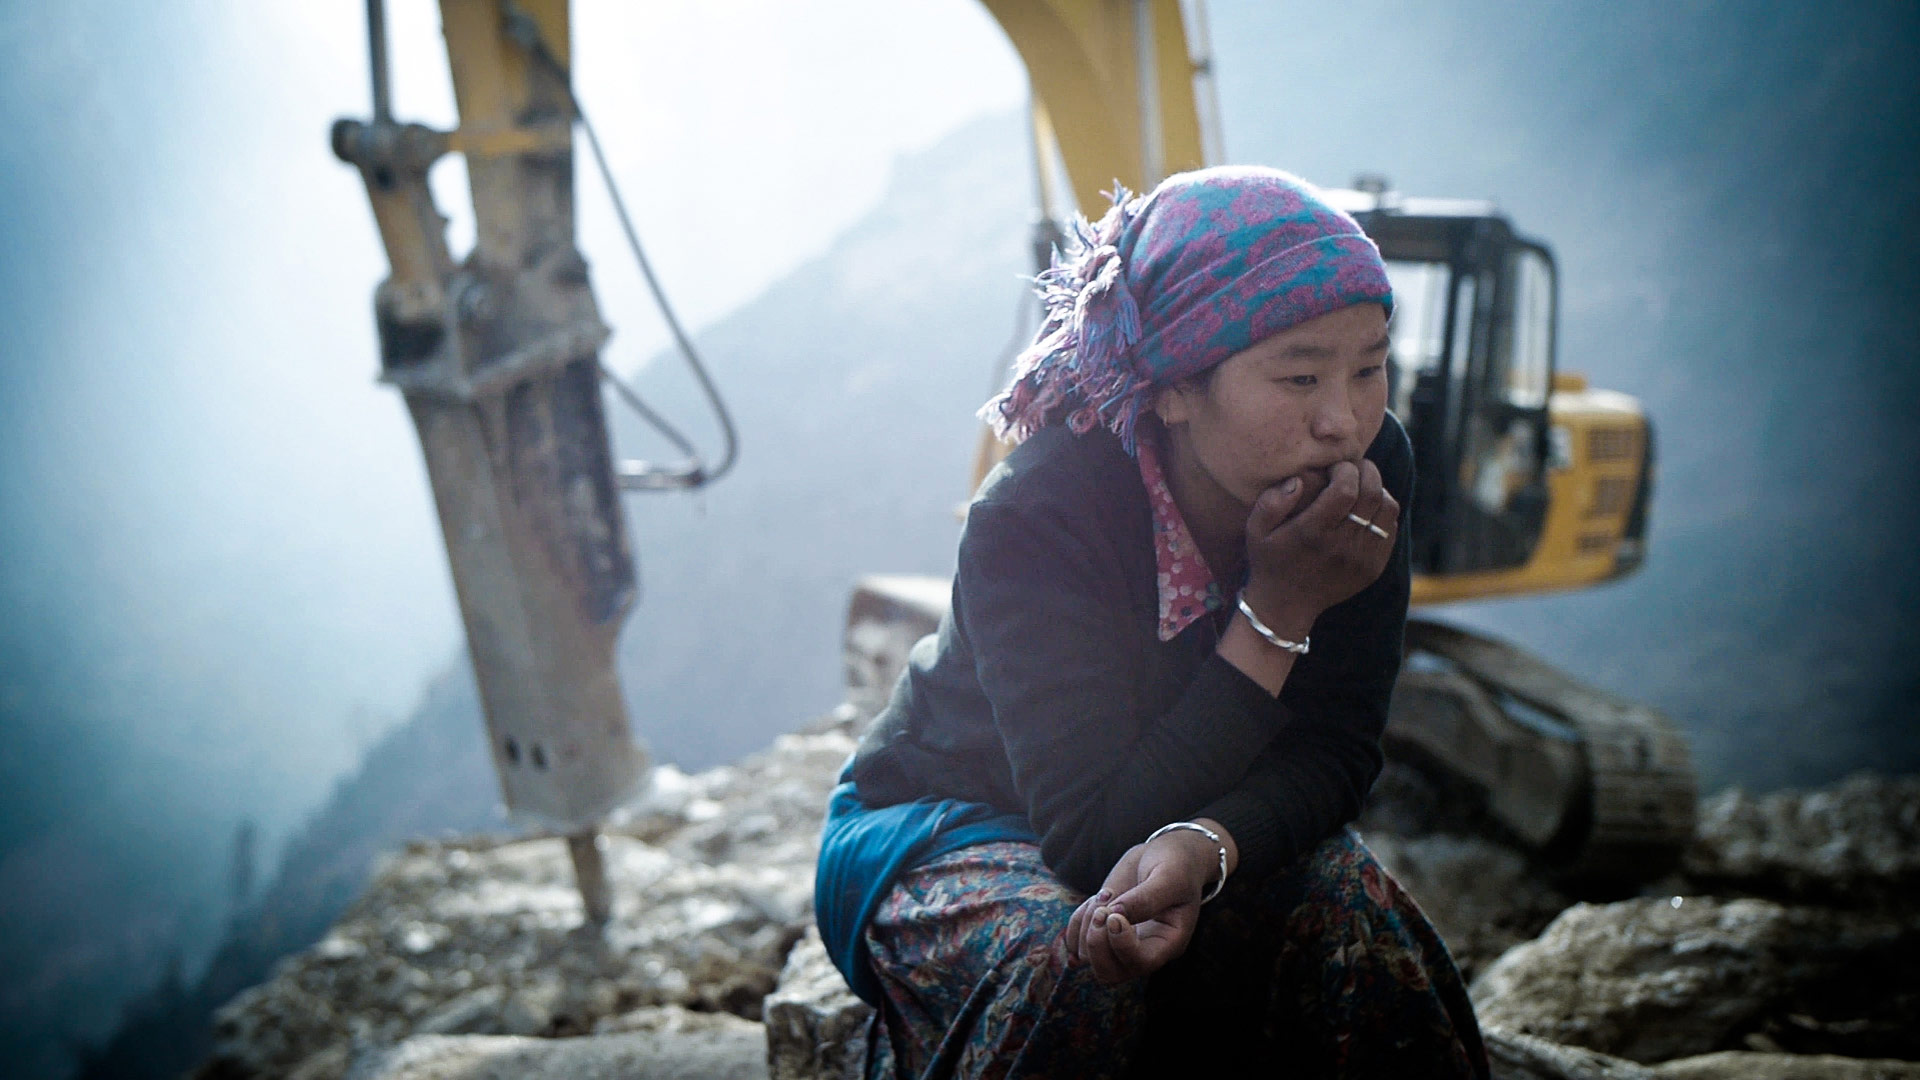 A woman crouches in thought in a rubble pile with an excavating machine behind her